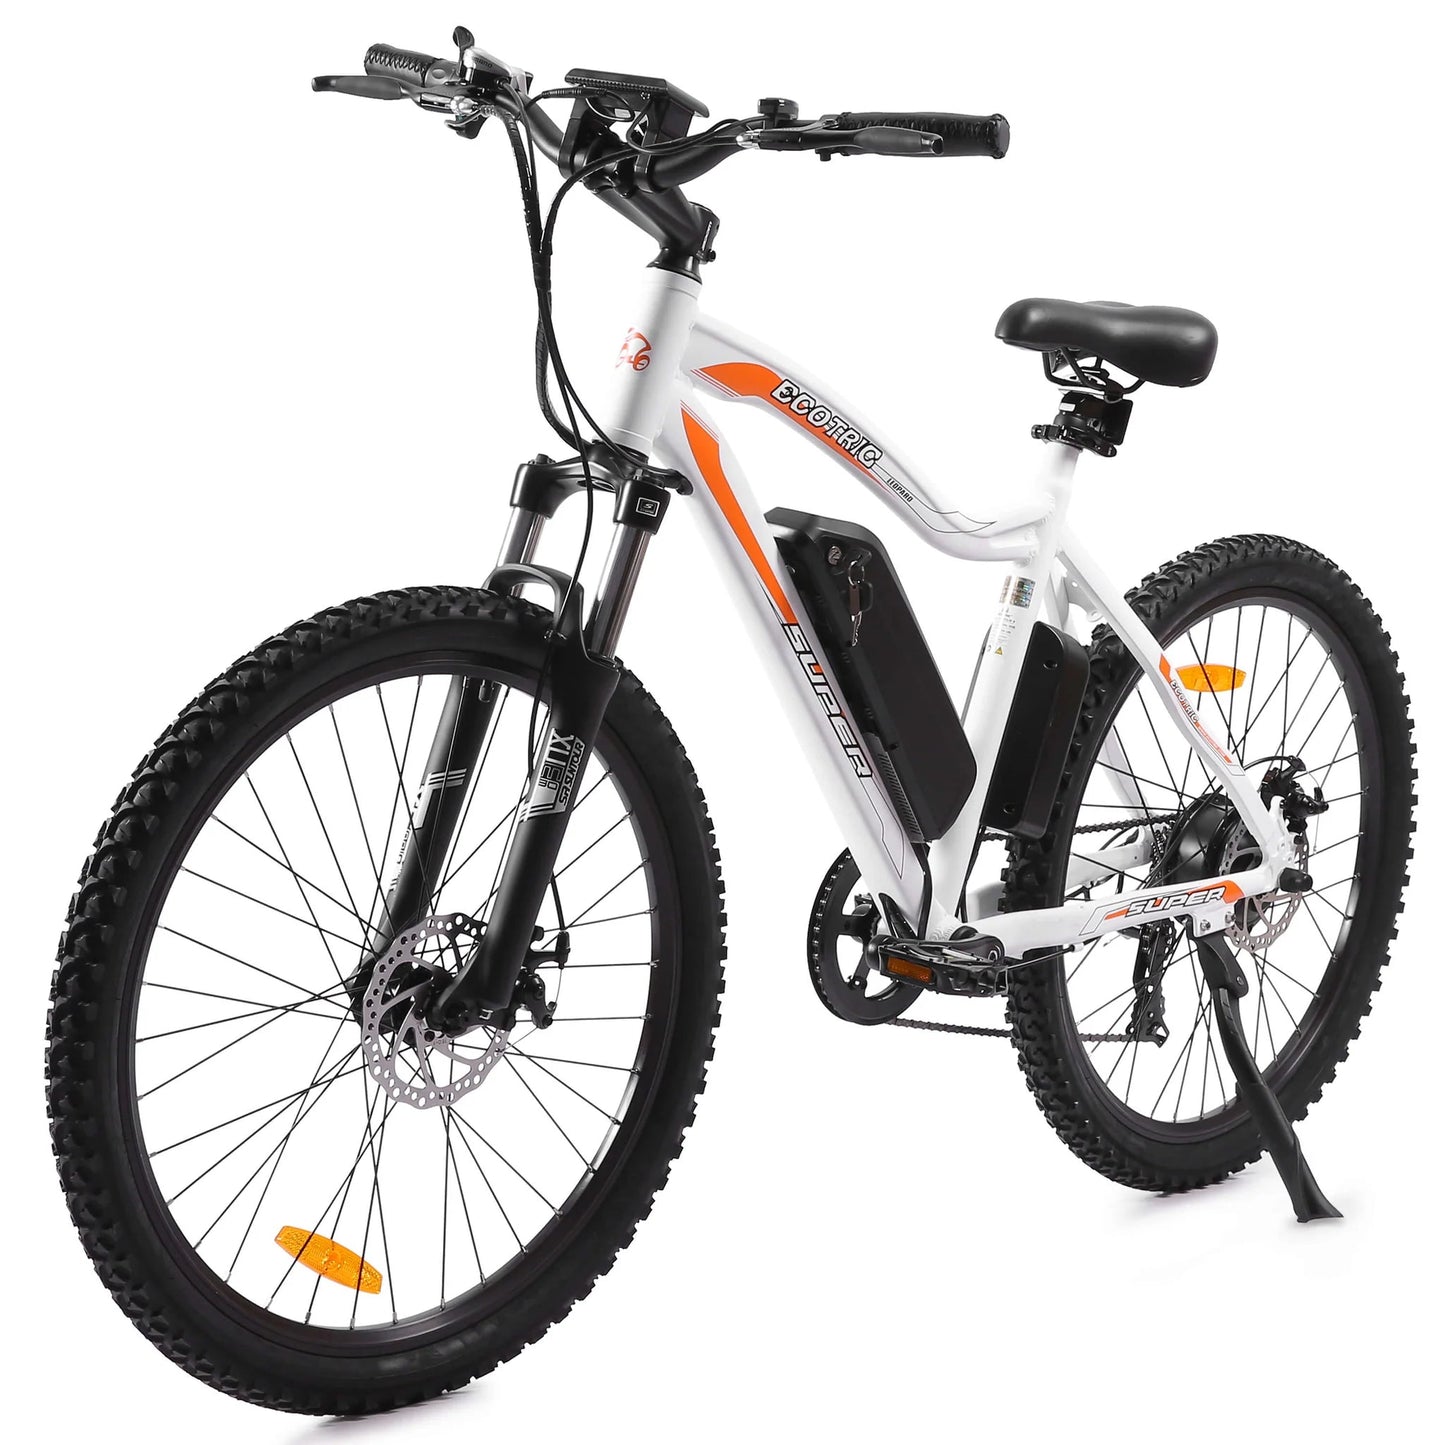 -Ecotric Leopard Electric Mountain Bike - Outdoor Style Company